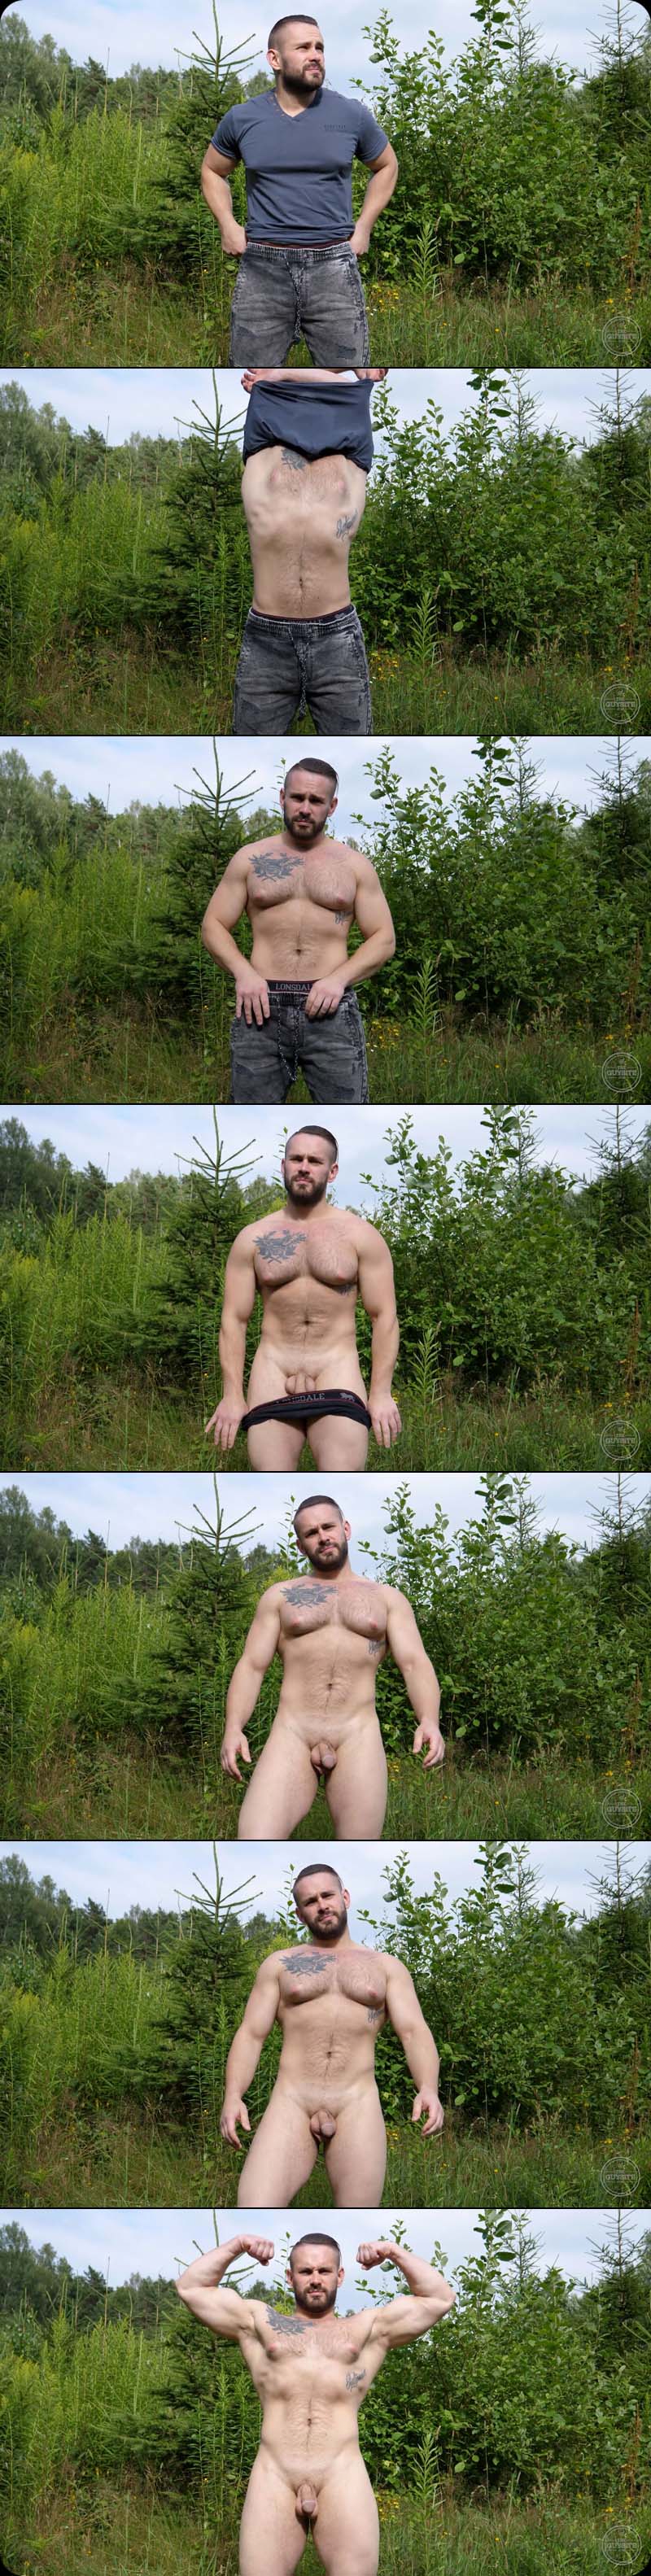 Big Pec Russian In The Woods at The Guy Site